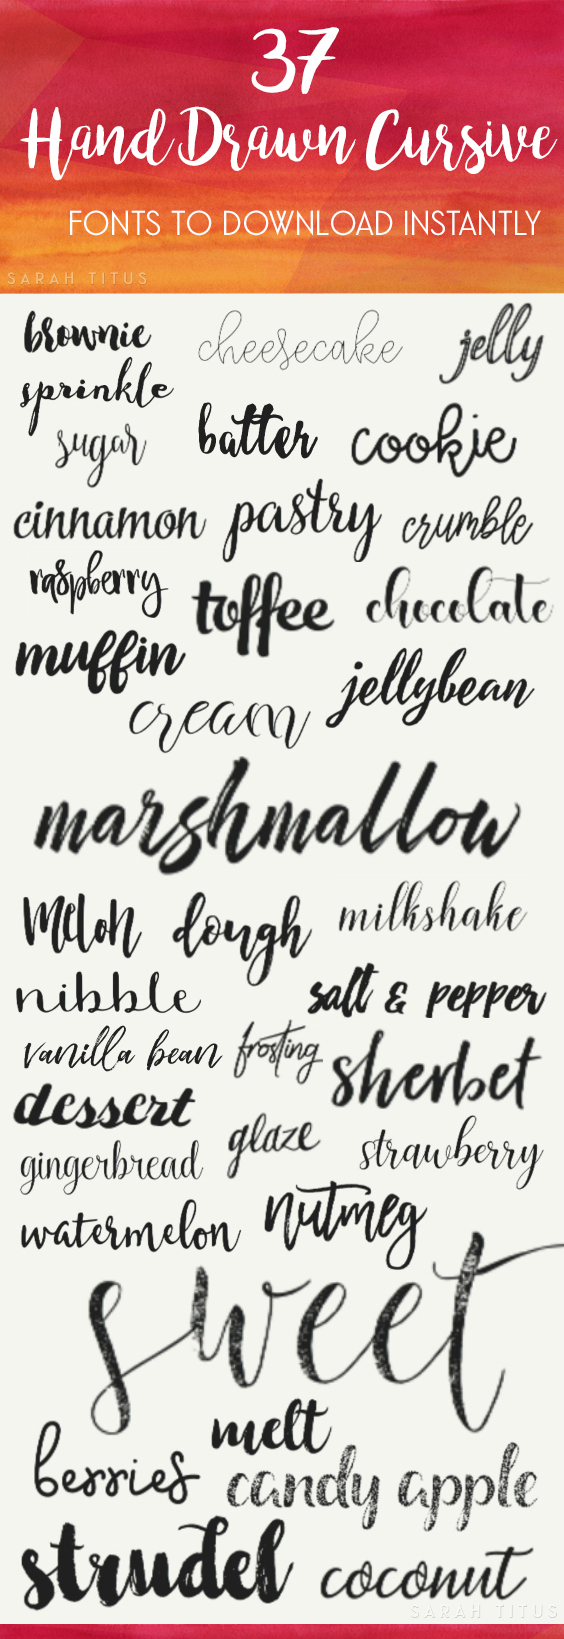 Having the same font as everyone else is like showing up to a party in the same dress as someone else. Be different with these 37 hand drawn cursive fonts to download instantly!